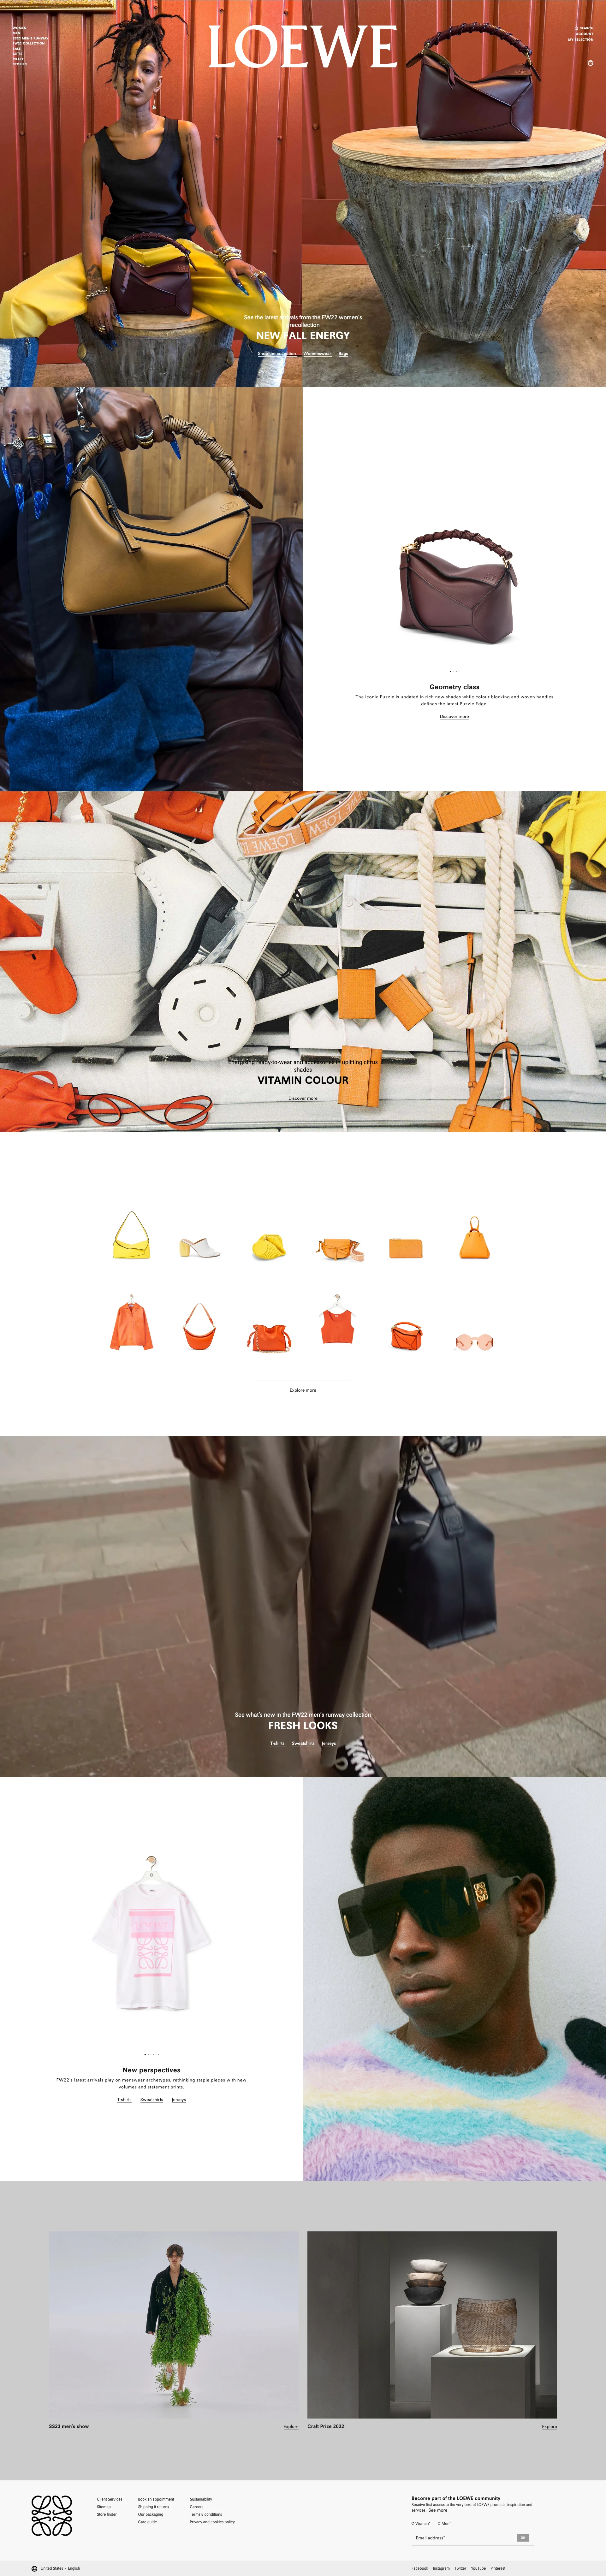 LOEWE Landing Page Example: Reinventing craft and leather, under the creative direction of Jonathan Anderson.